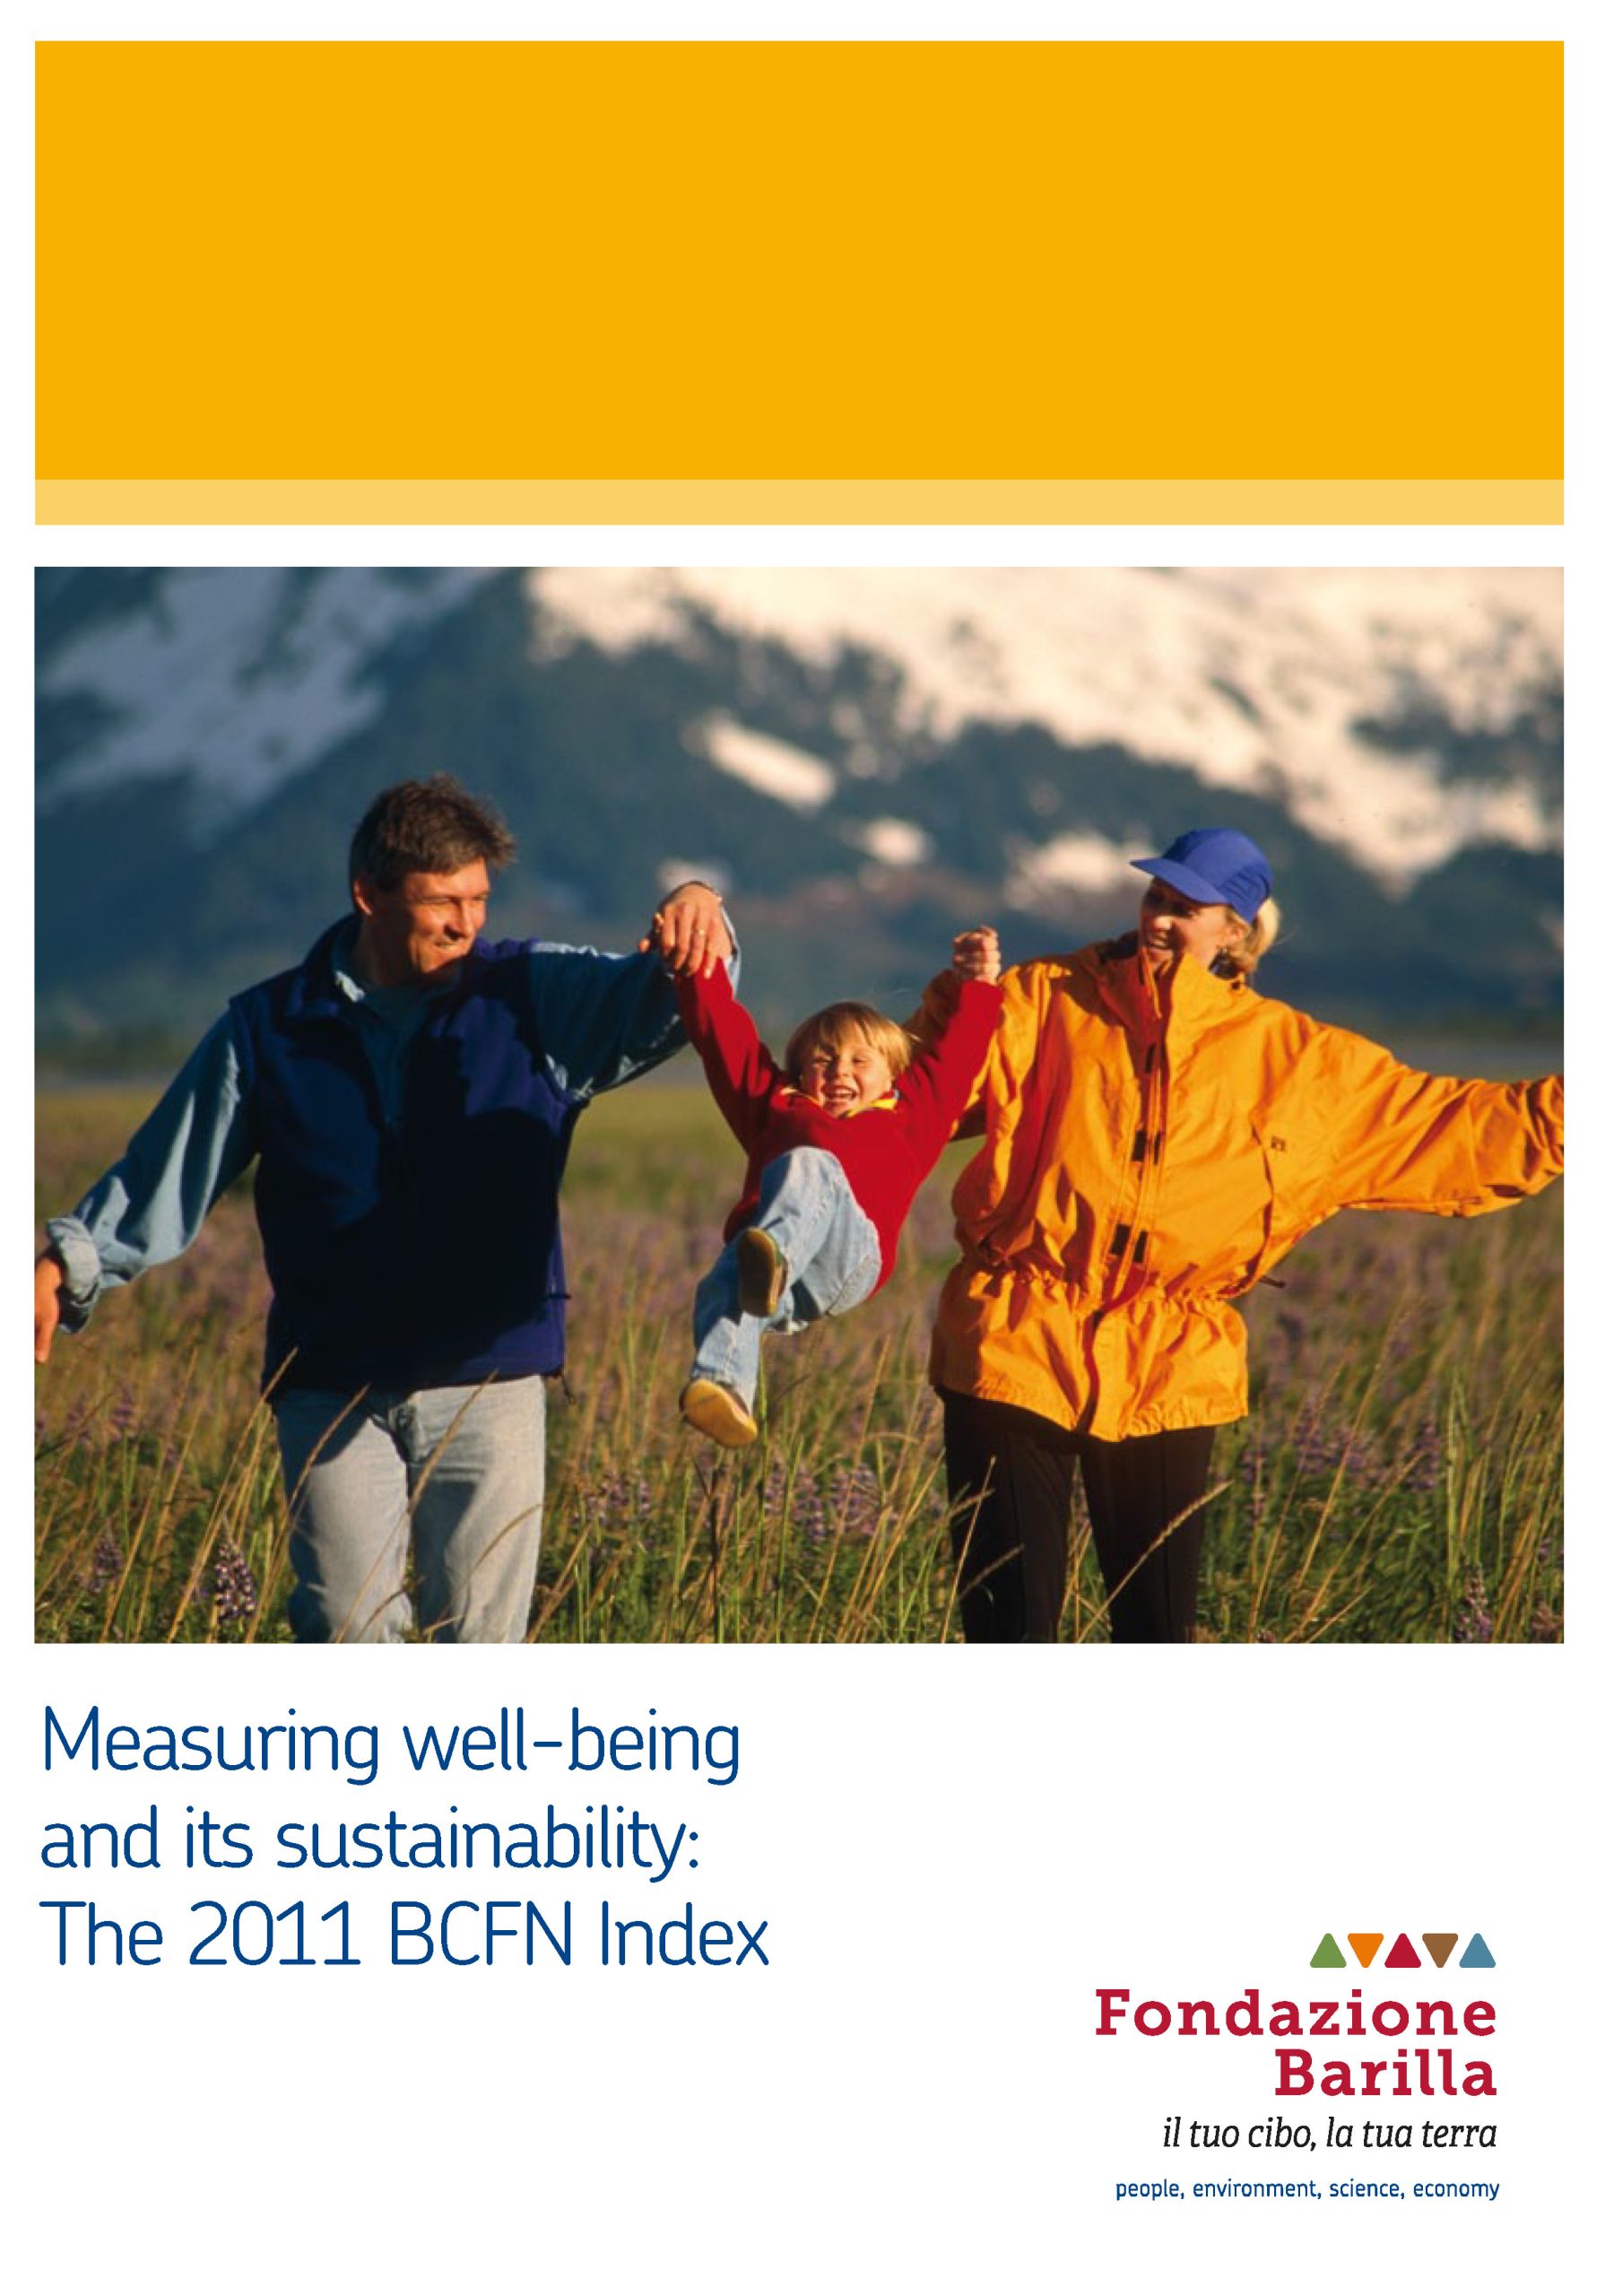 Measuring well-being and its sustainability